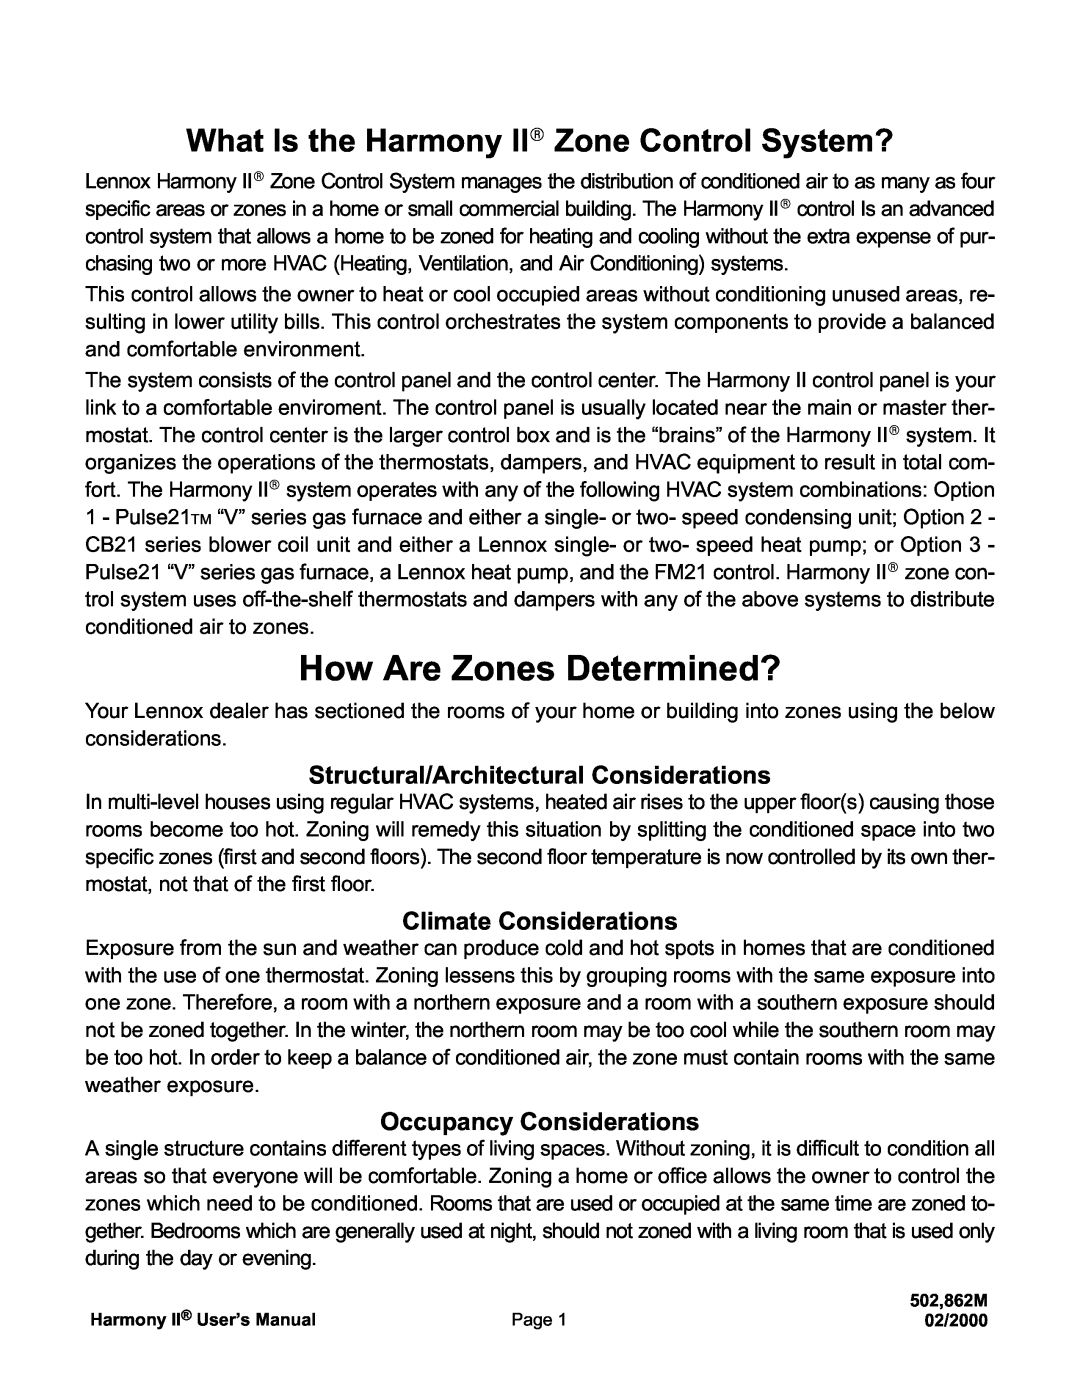 Lennox Hearth 502, 862M user manual How Are Zones Determined?, What Is the Harmony IIR Zone Control System? 